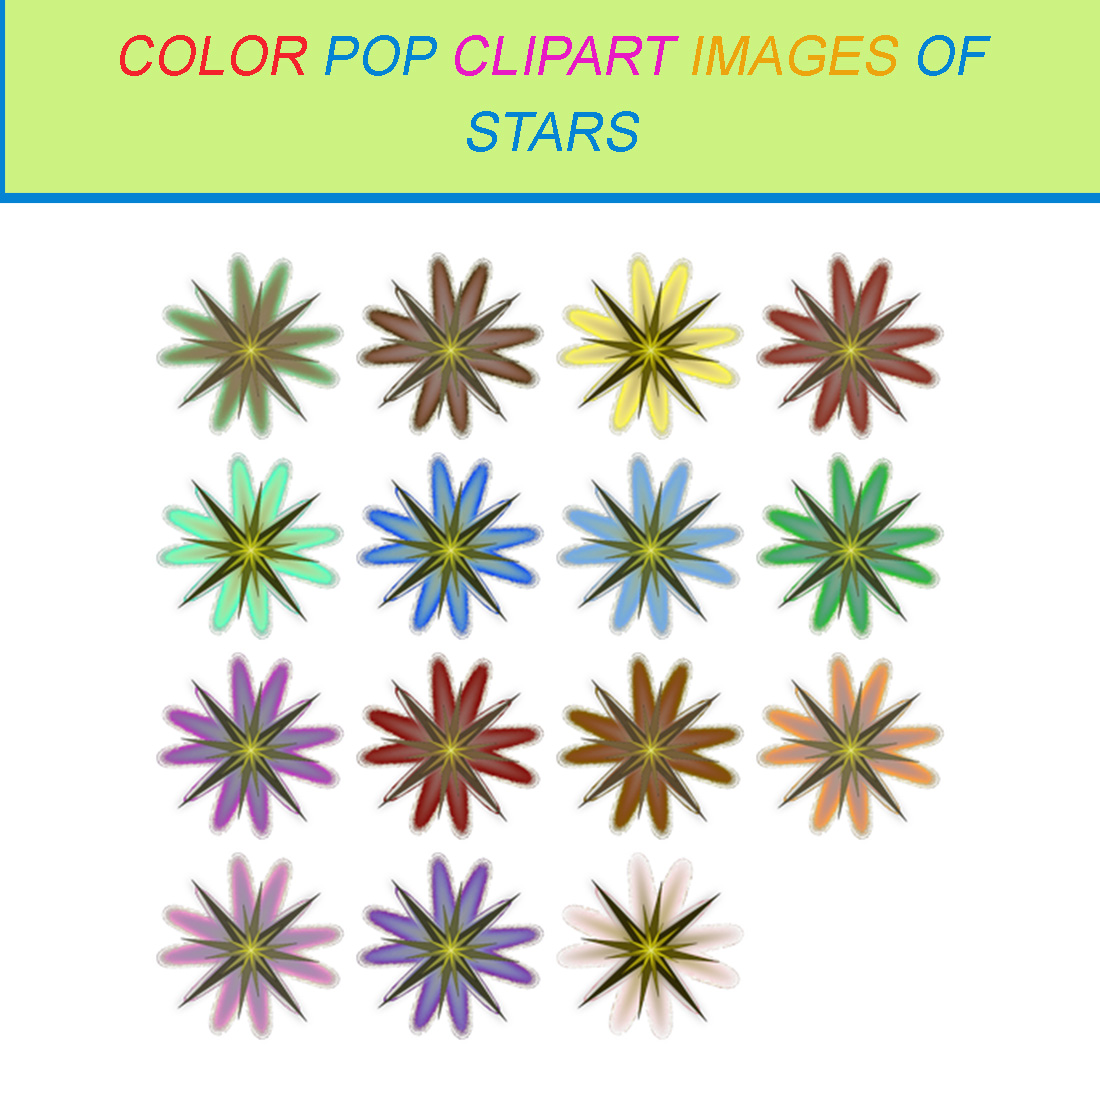 15 COLOR POP CLIPART IMAGES OF STARS cover image.